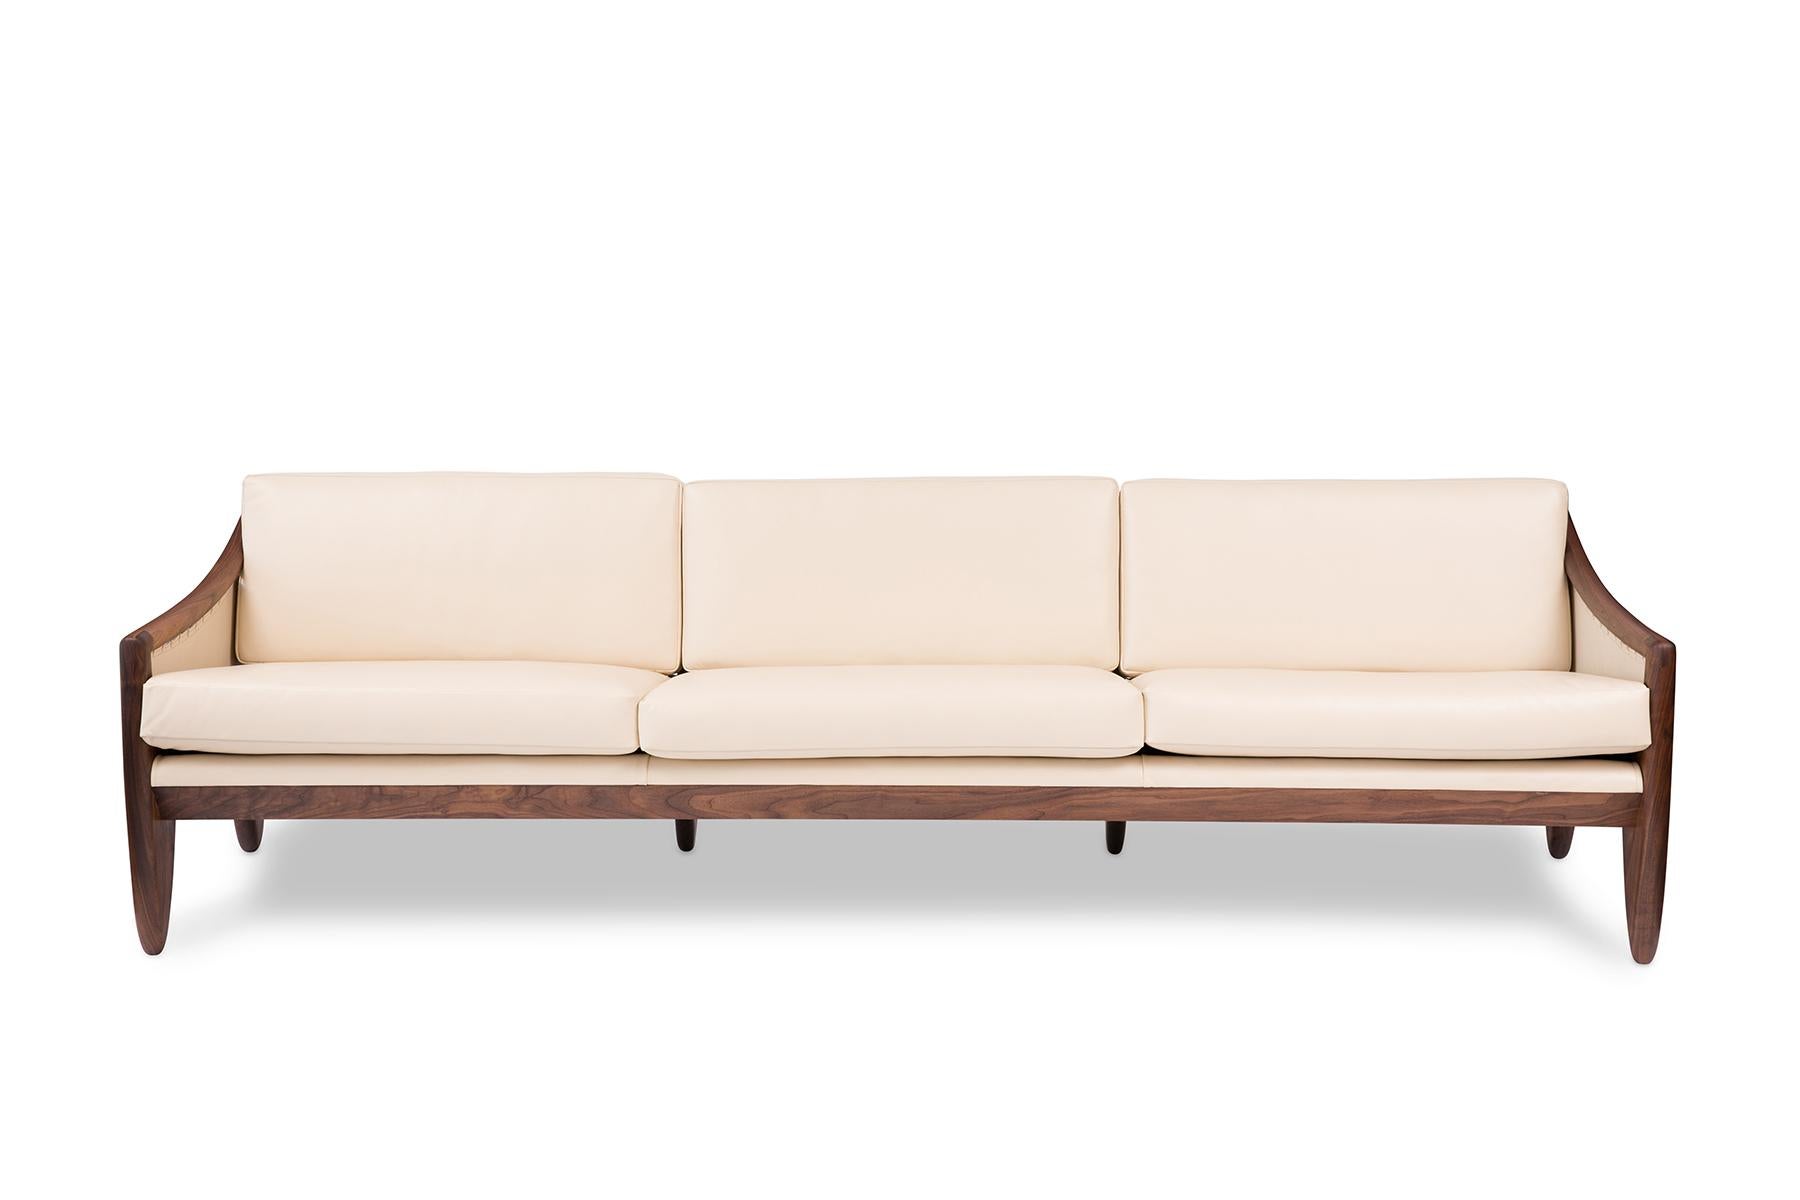 Designed and handcrafted after a unique one-of-a-kind 1957 sofa by designer Allen Ditson, this couch's stunning walnut frame took over 6 weeks of daily sculpting to complete. The sofa is also upholstered in a fine buttery cream Edelman leather with